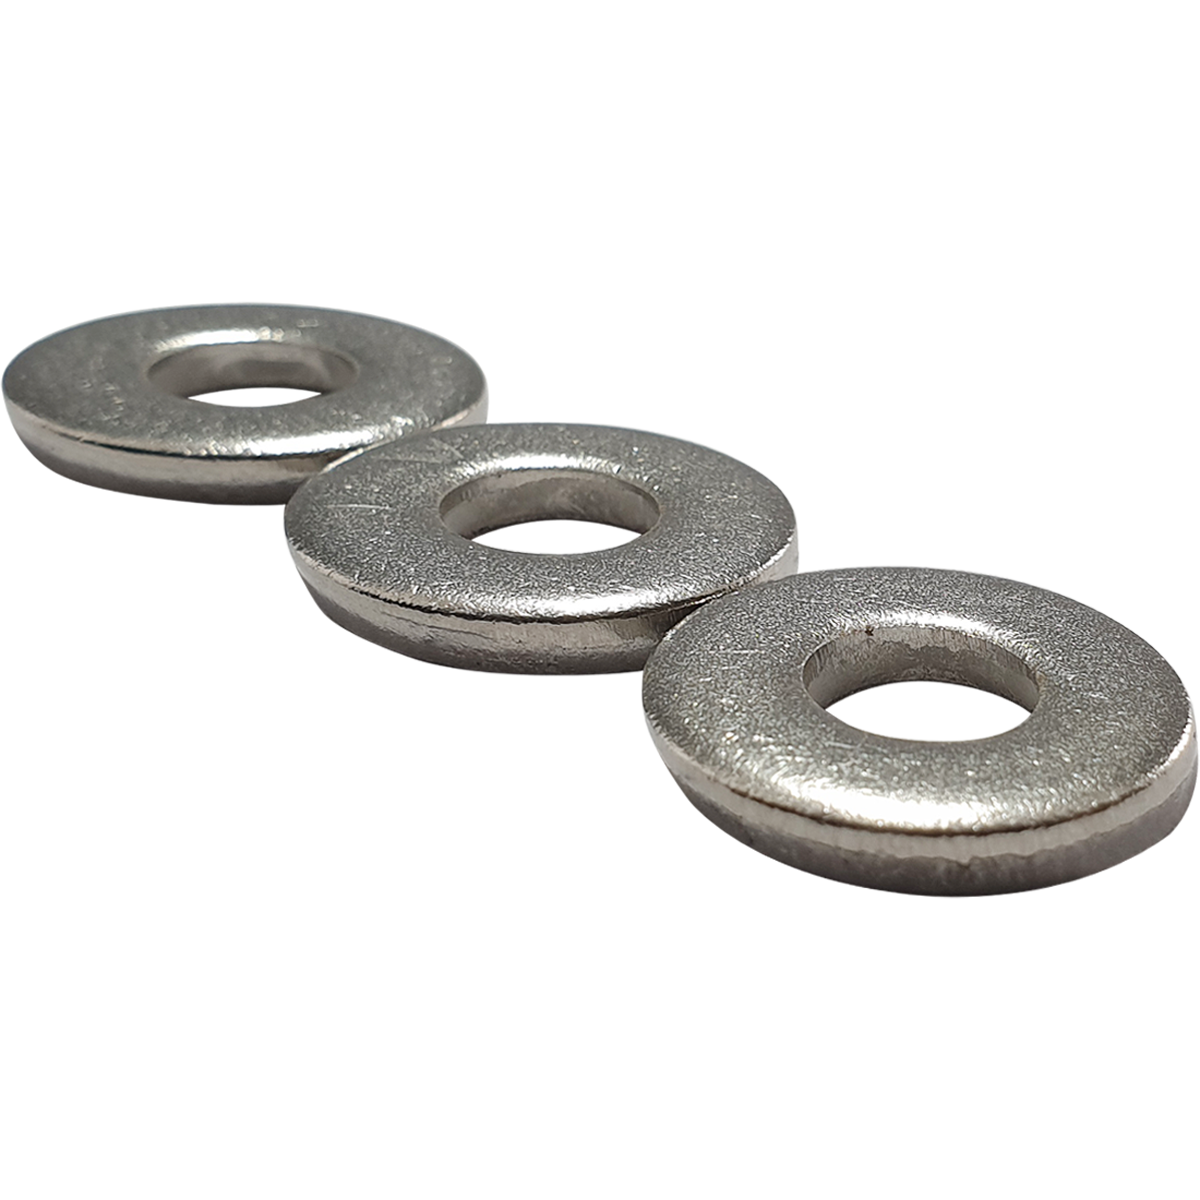 Metric, A2 stainless steel, Heavy Duty Washers, are available in a selection of diameters